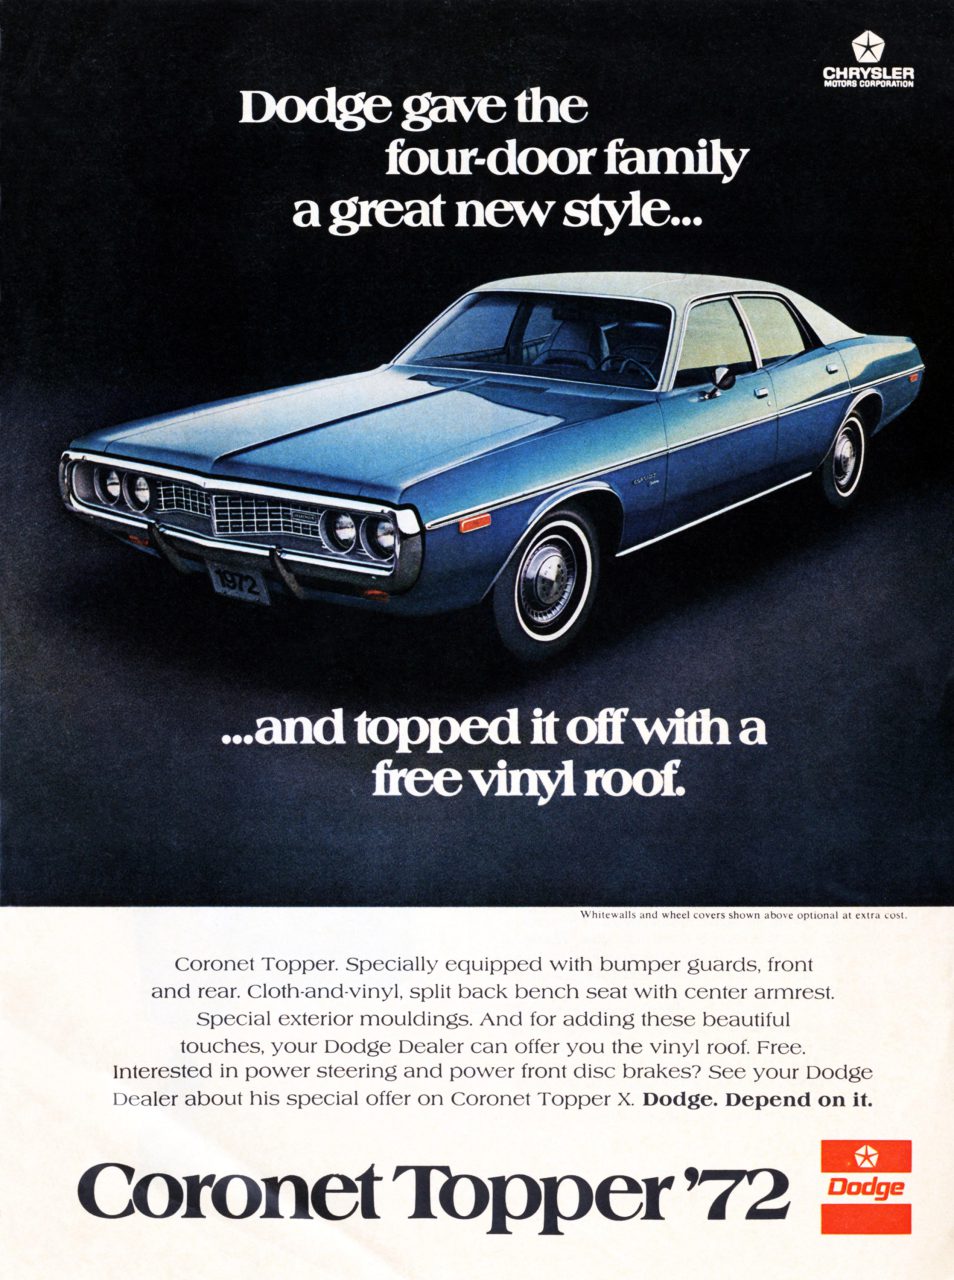 Dodge, Photo Gallery: 1970s Dodge Advertisements, ClassicCars.com Journal